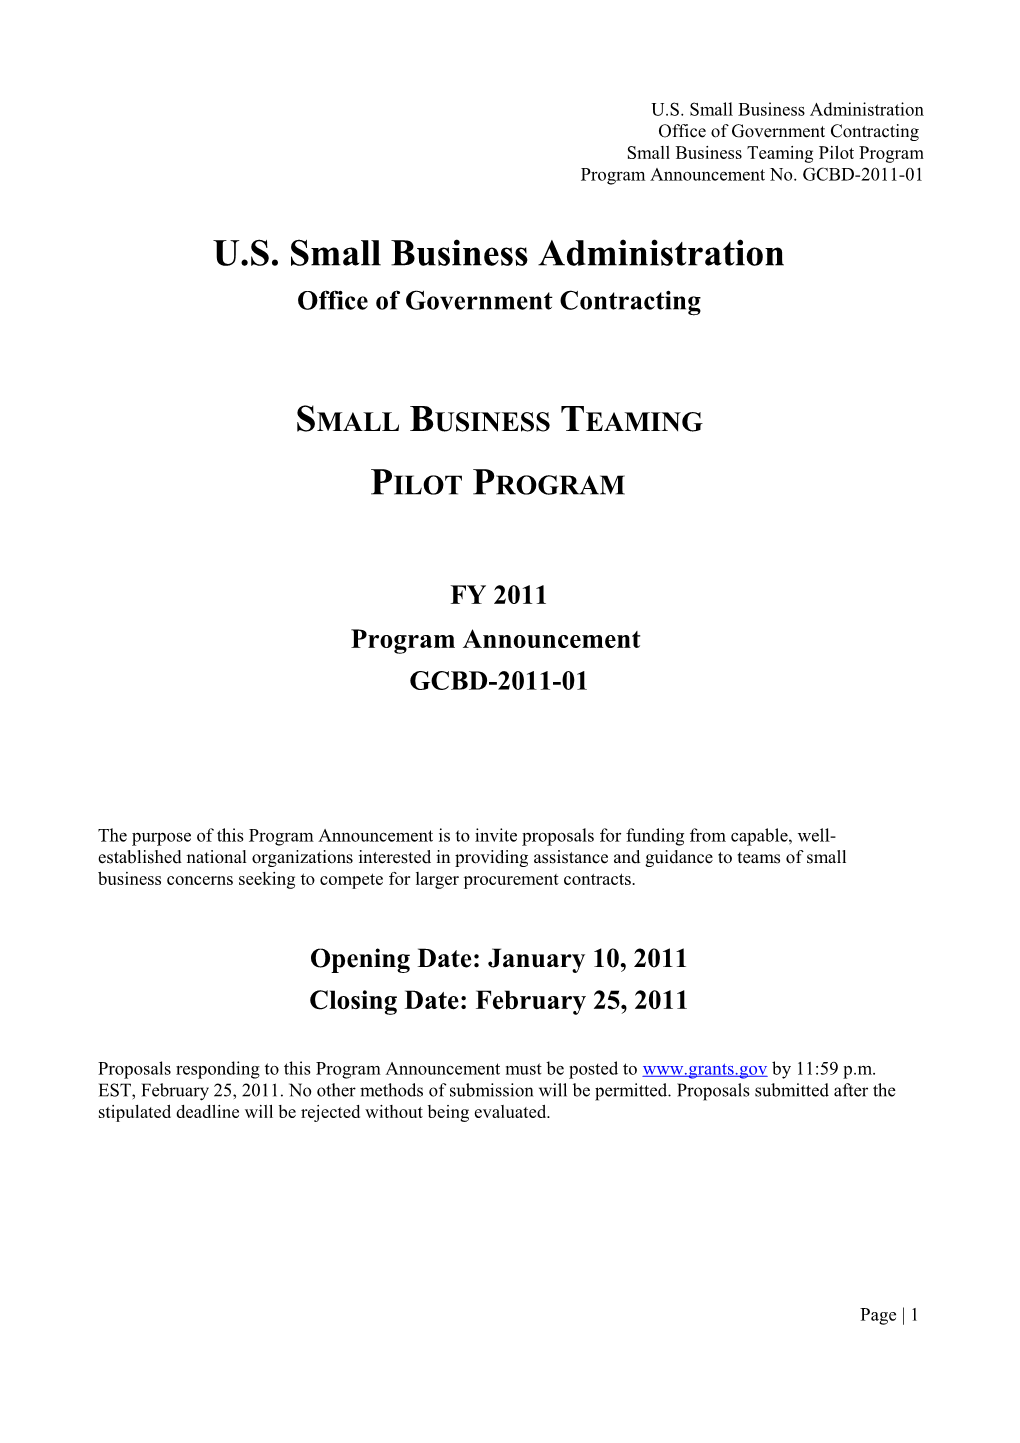 Program Announcement for the Small Business Sustainability Initiative Technology Creationprogram